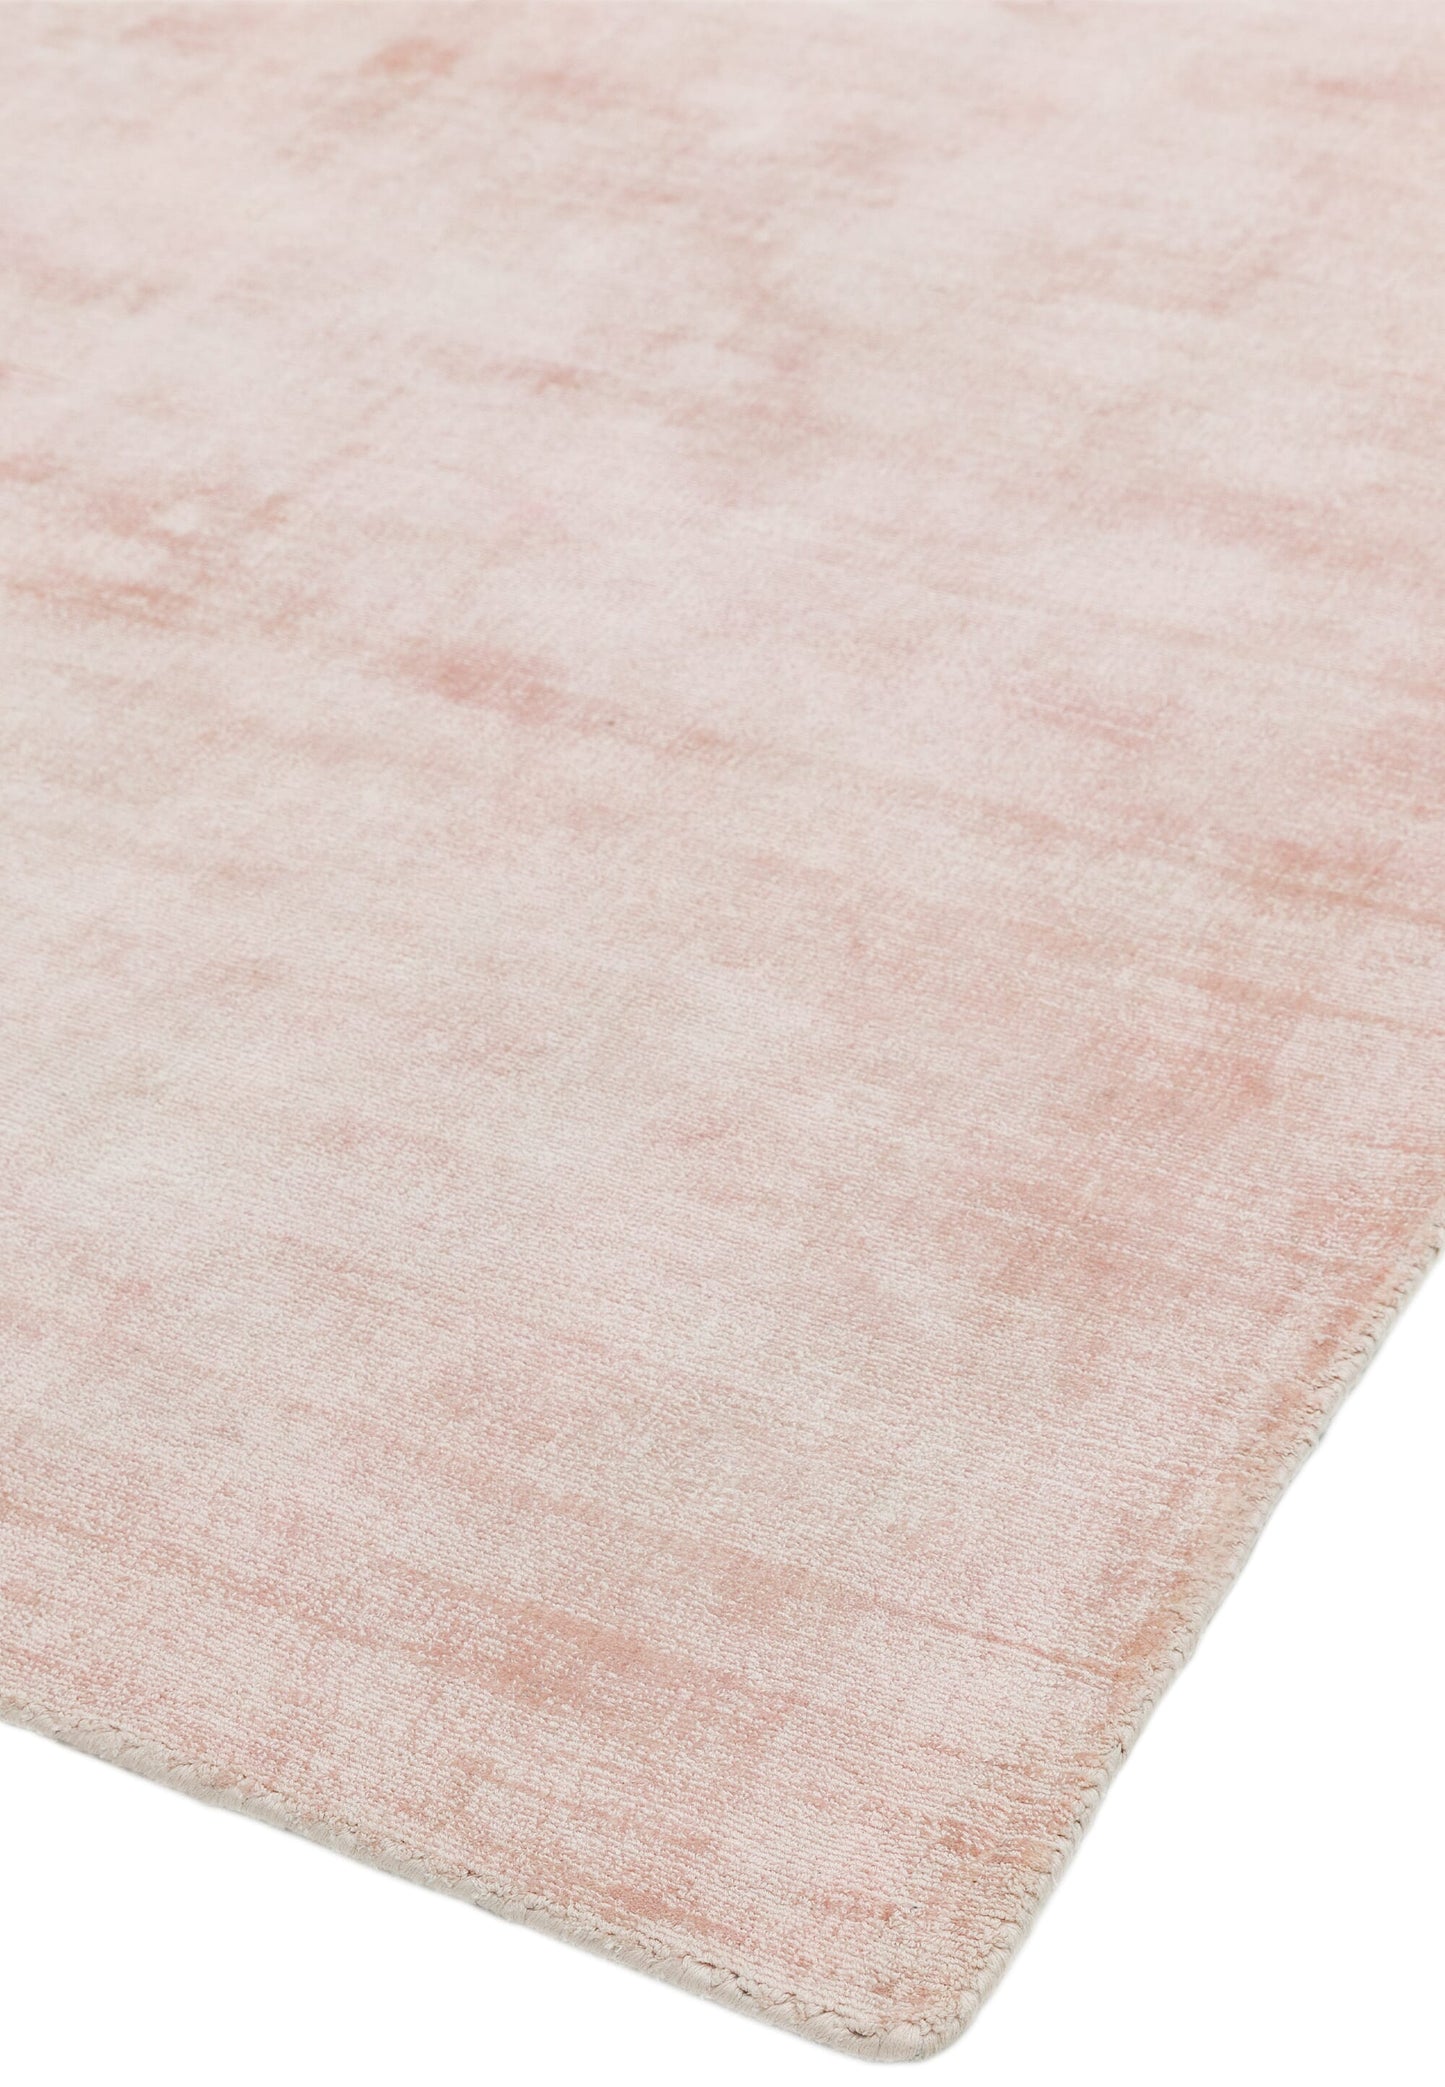 Asiatic Carpets Blade Hand Woven Rug Pink - 240 x 340cm